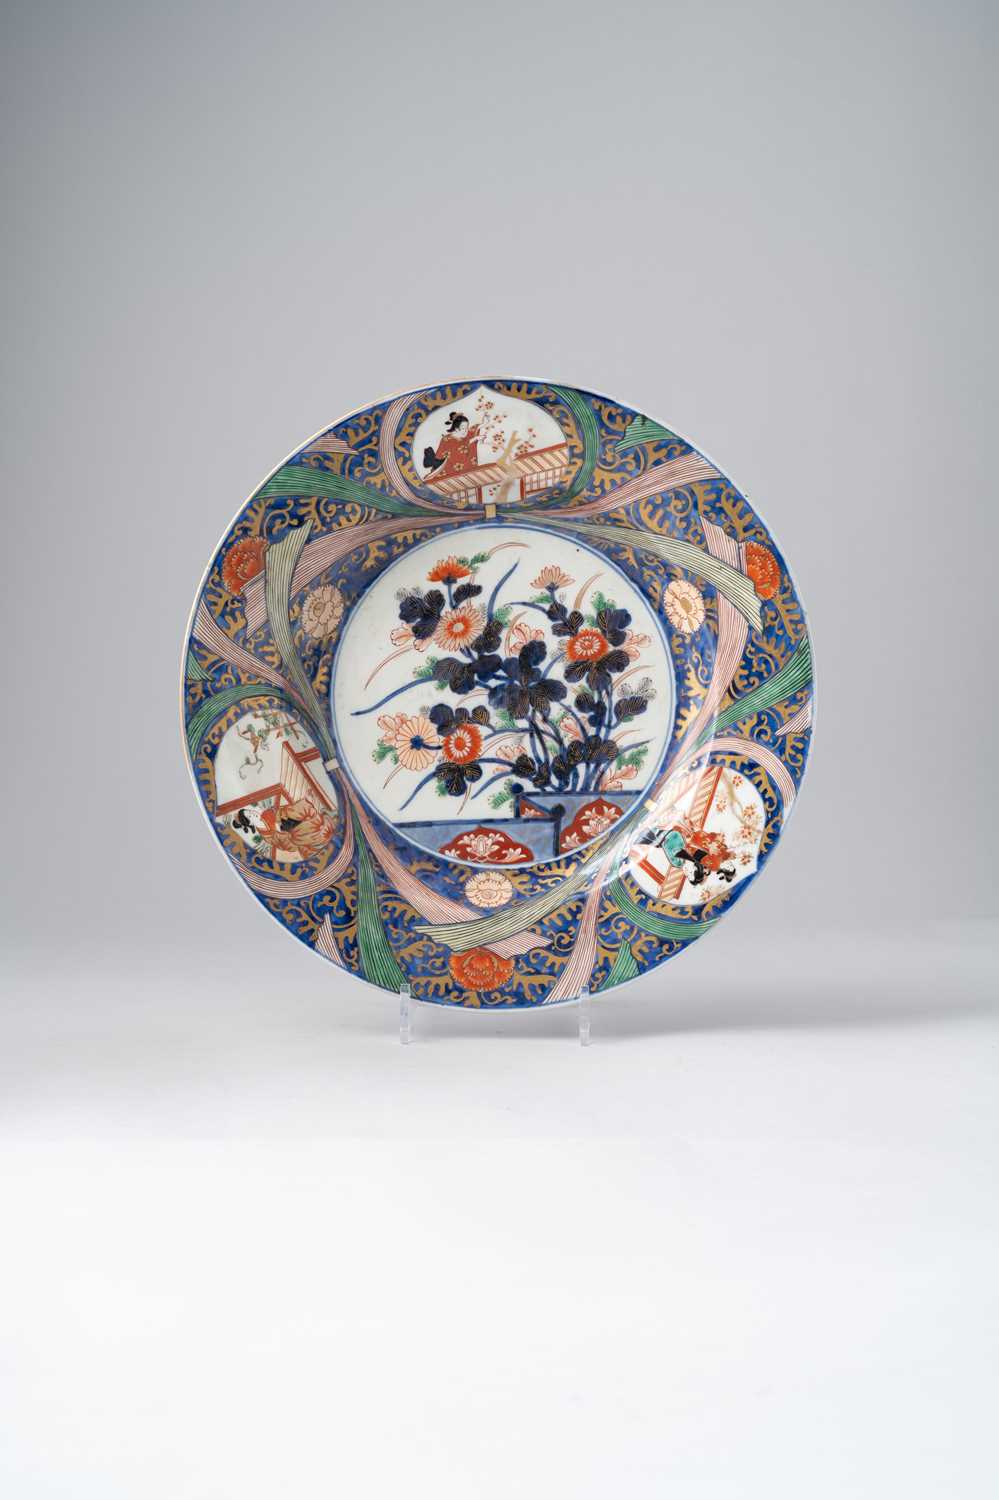 NO RESERVE A LARGE JAPANESE IMARI CHARGER EDO PERIOD, 18TH CENTURY Decorated in underglaze blue,